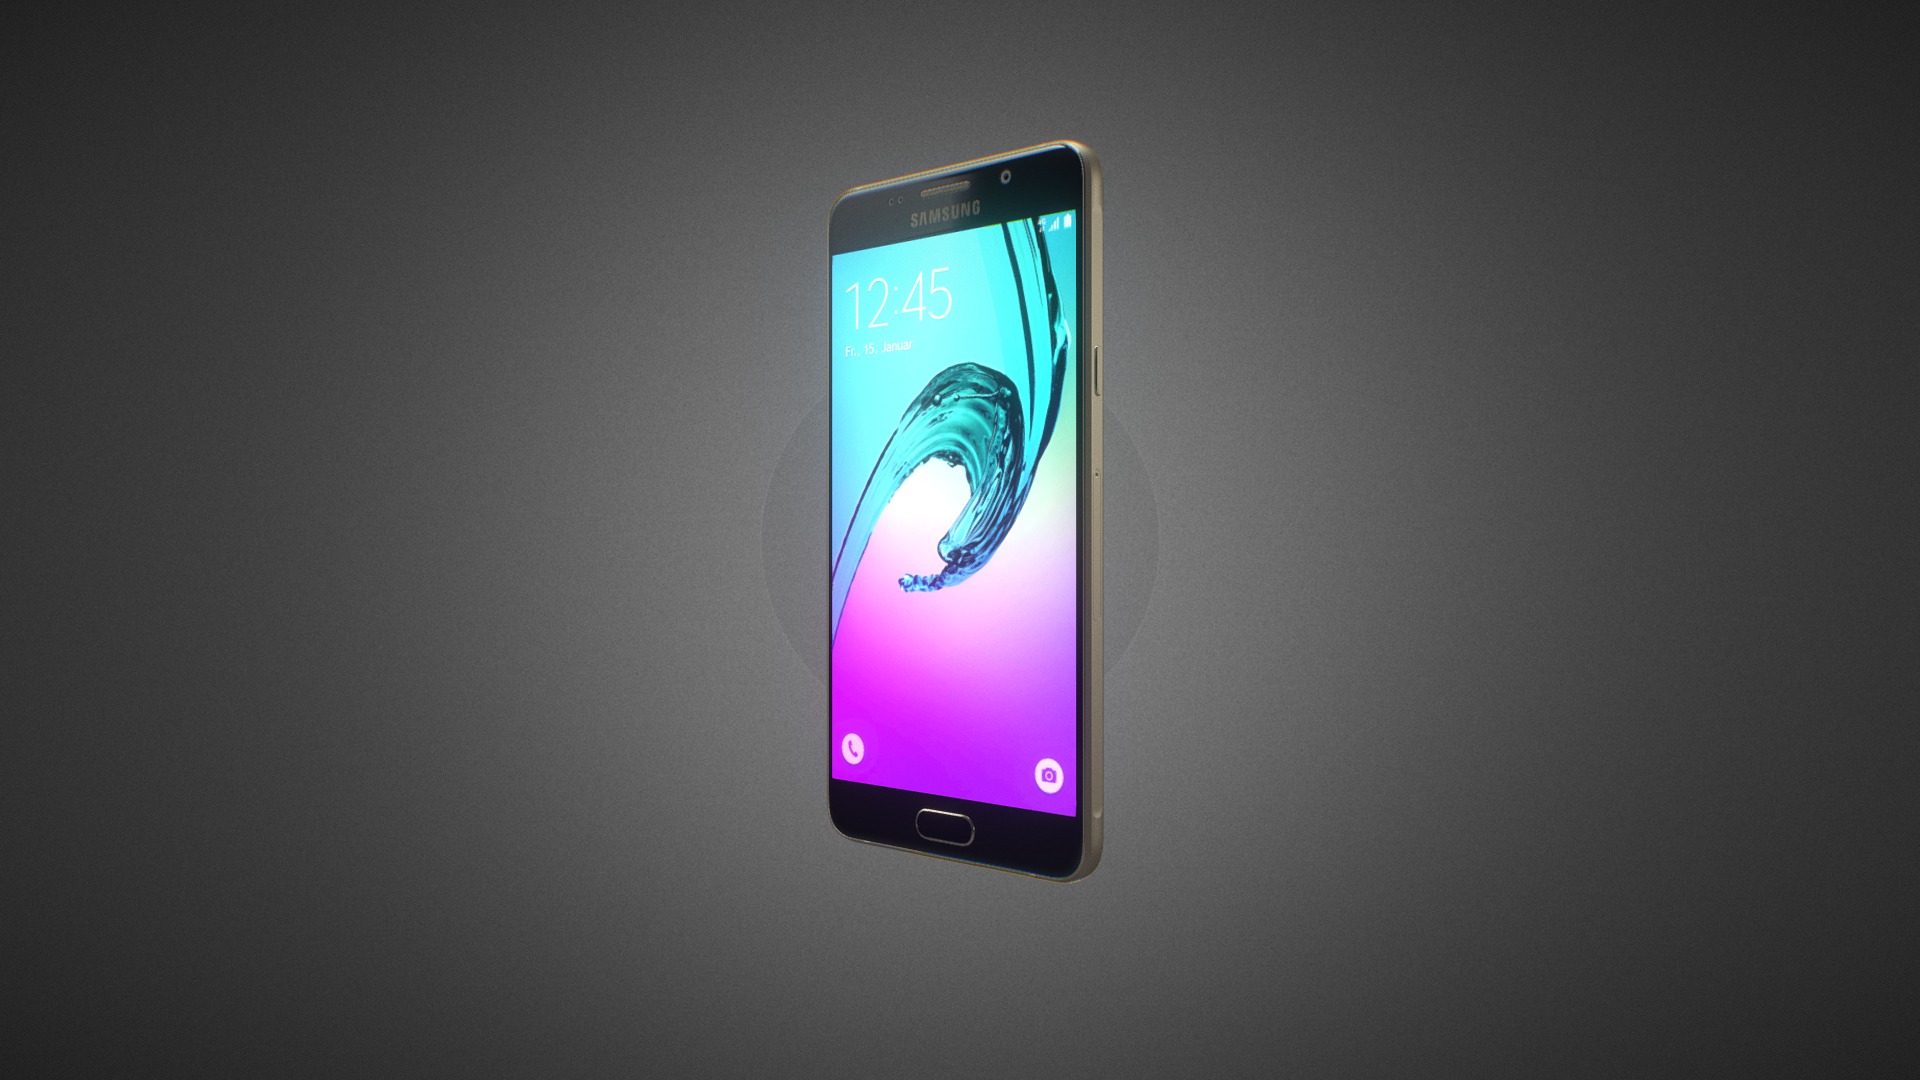 3D model Samsung Galaxy A5 2016 for Element 3D - This is a 3D model of the Samsung Galaxy A5 2016 for Element 3D. The 3D model is about a cell phone with a blue screen.